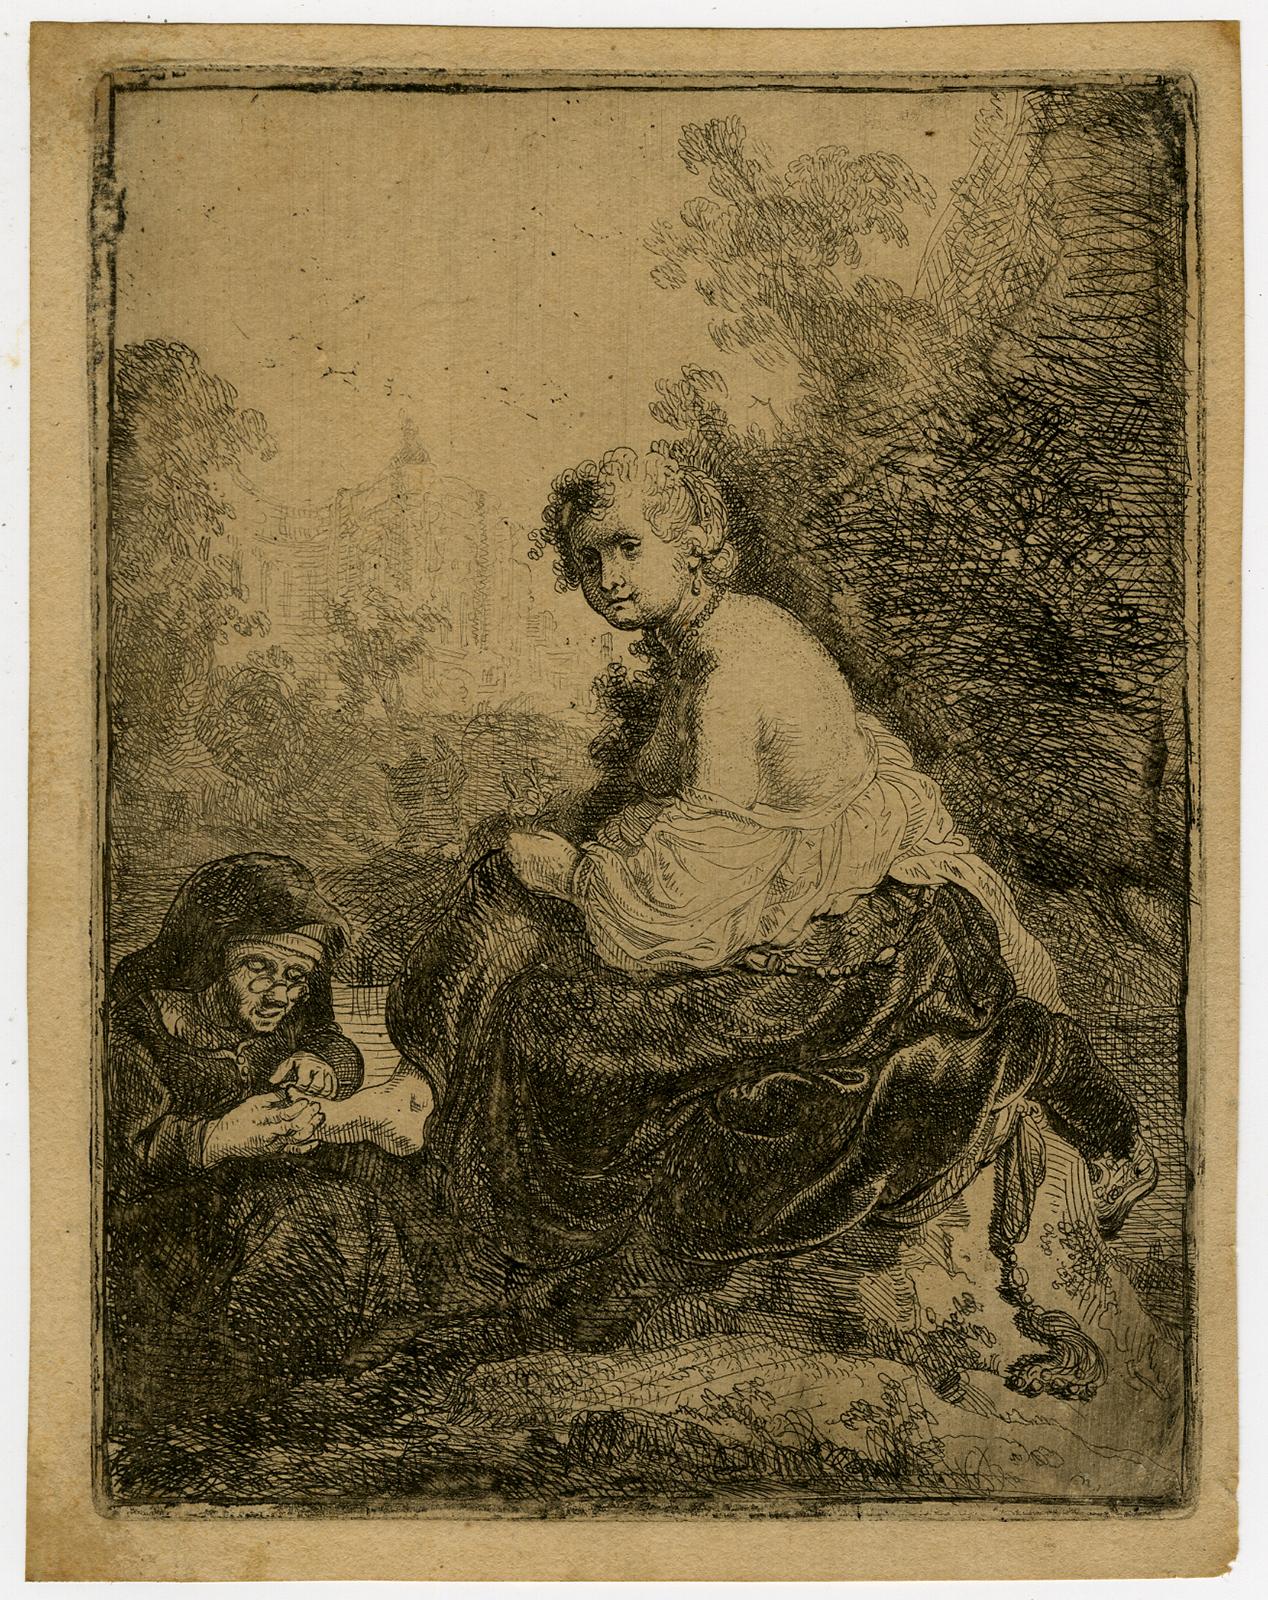 Unknown Print - An old woman cutting her mistress's nails - Etching - 17th Century